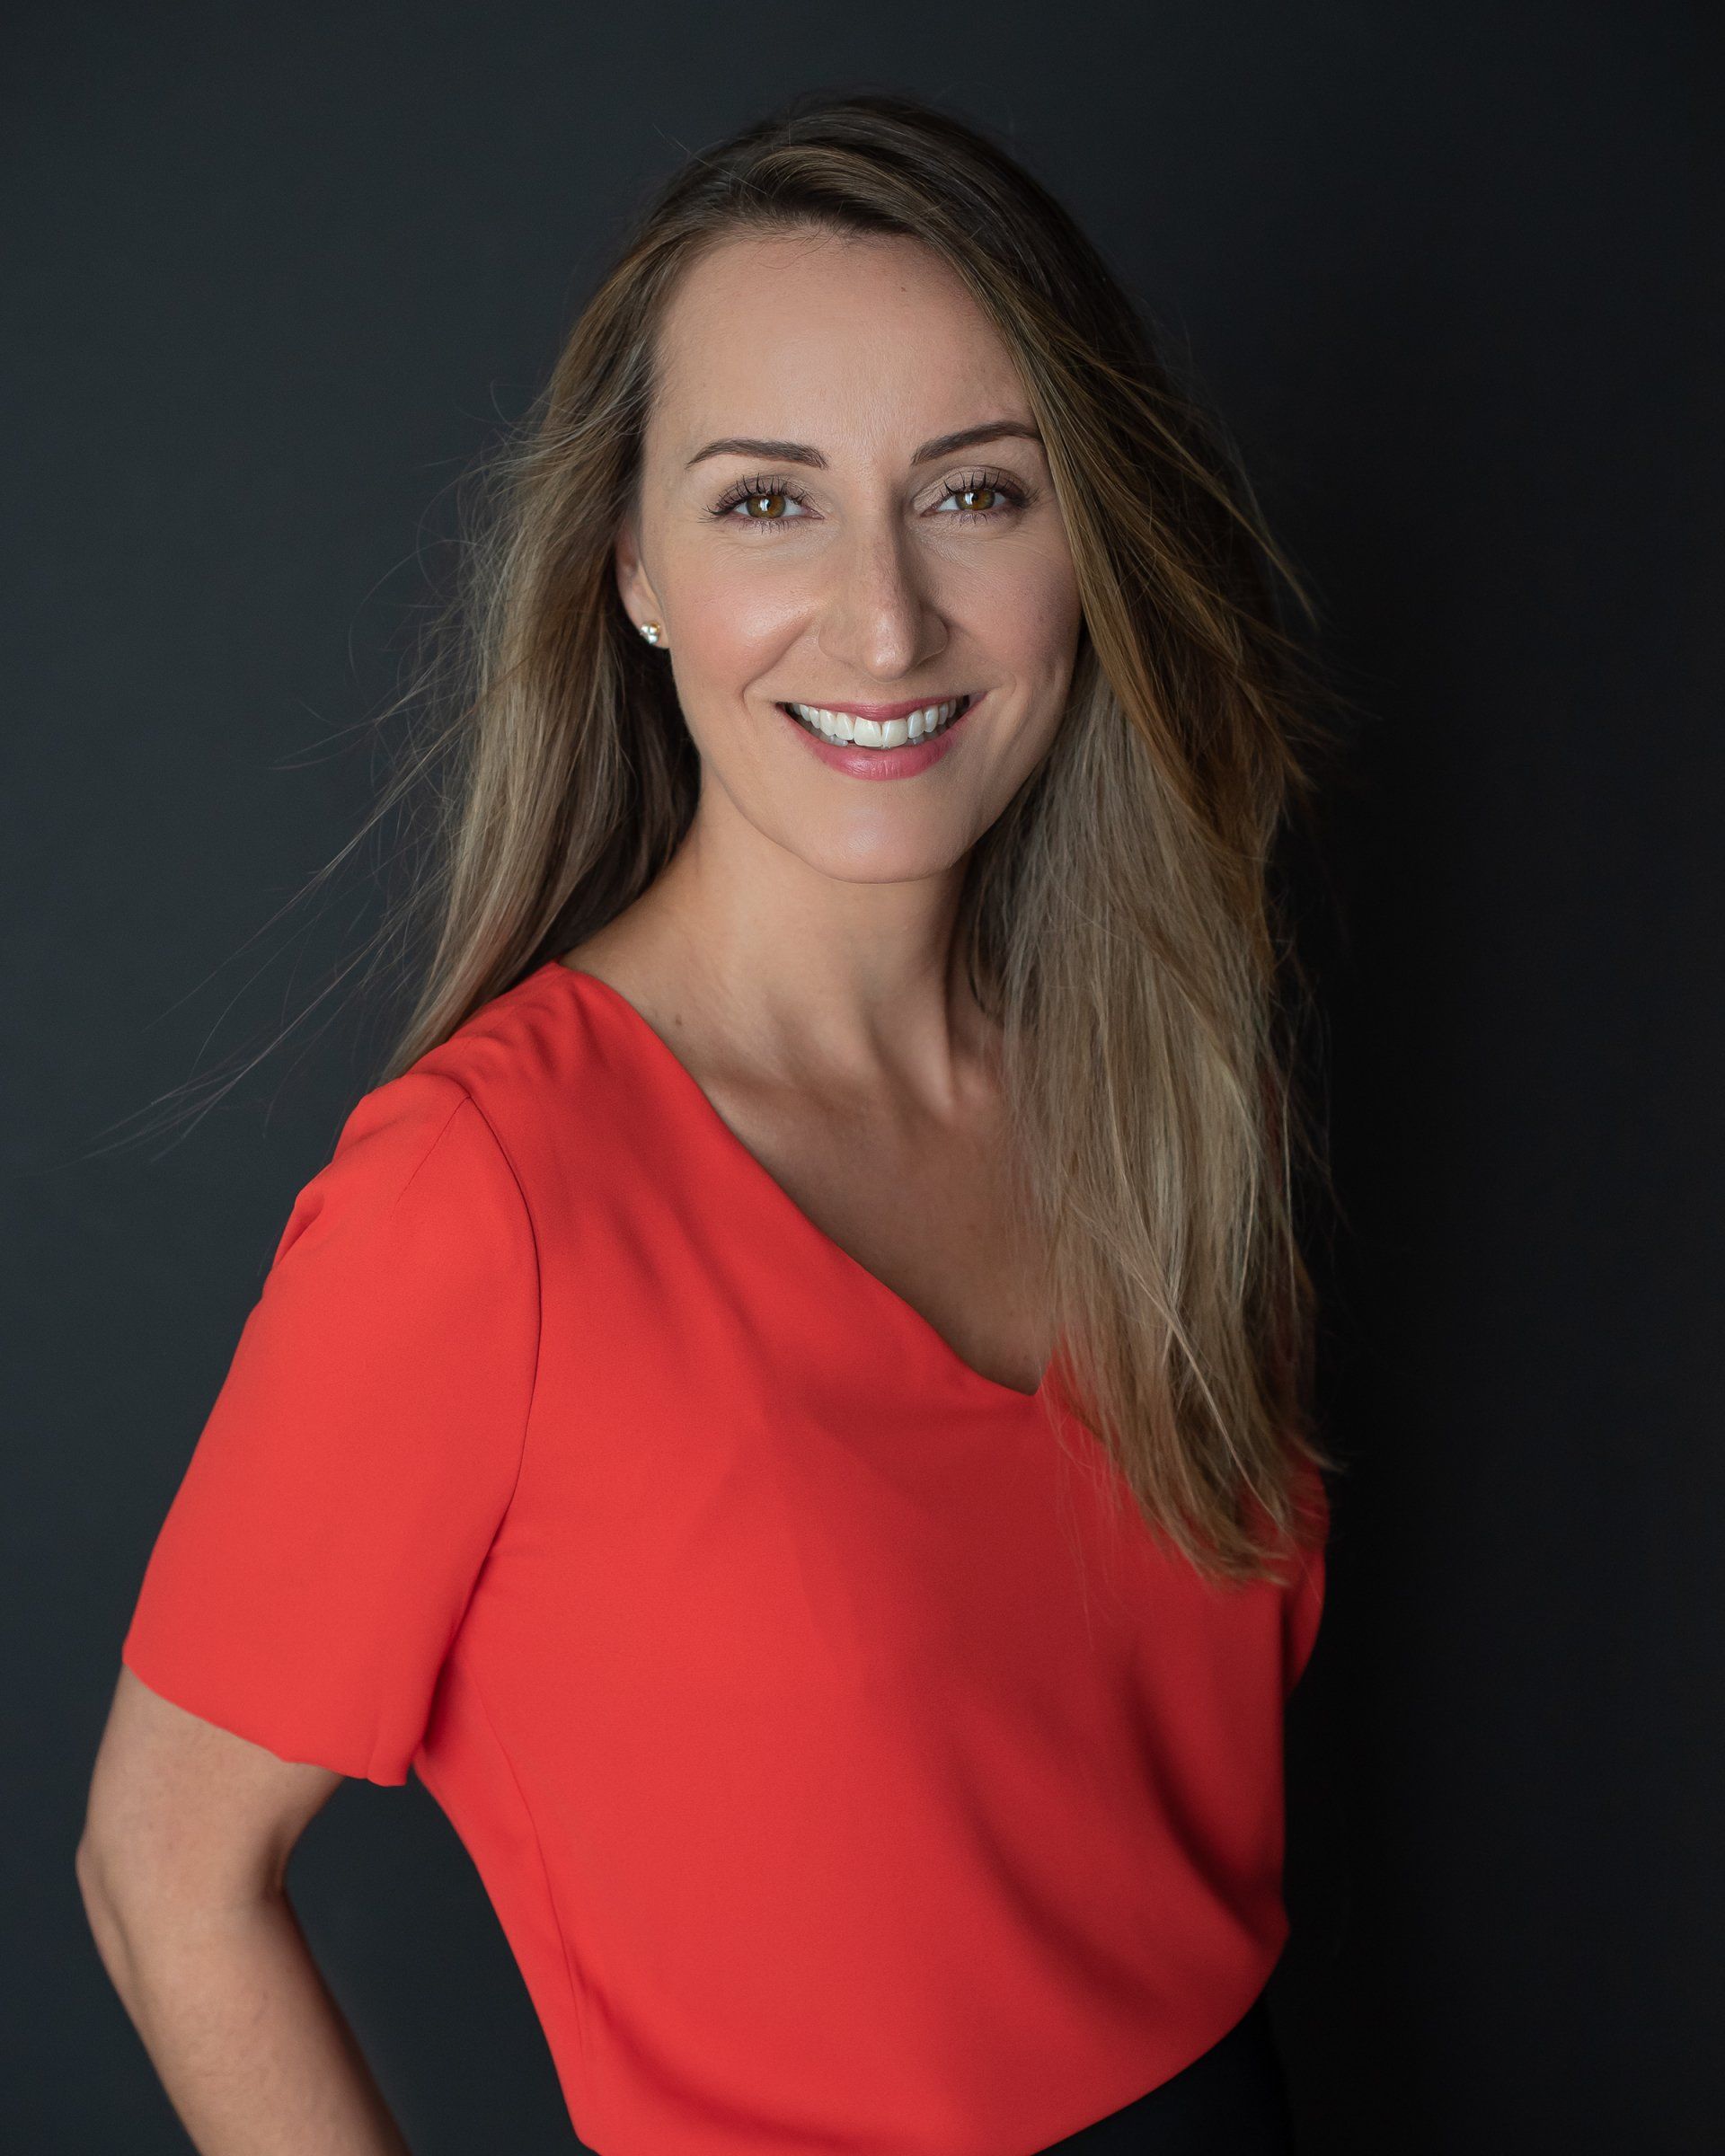 LinkedIn Headshots Toronto | Stacey Naglie Photography | Woman with red top